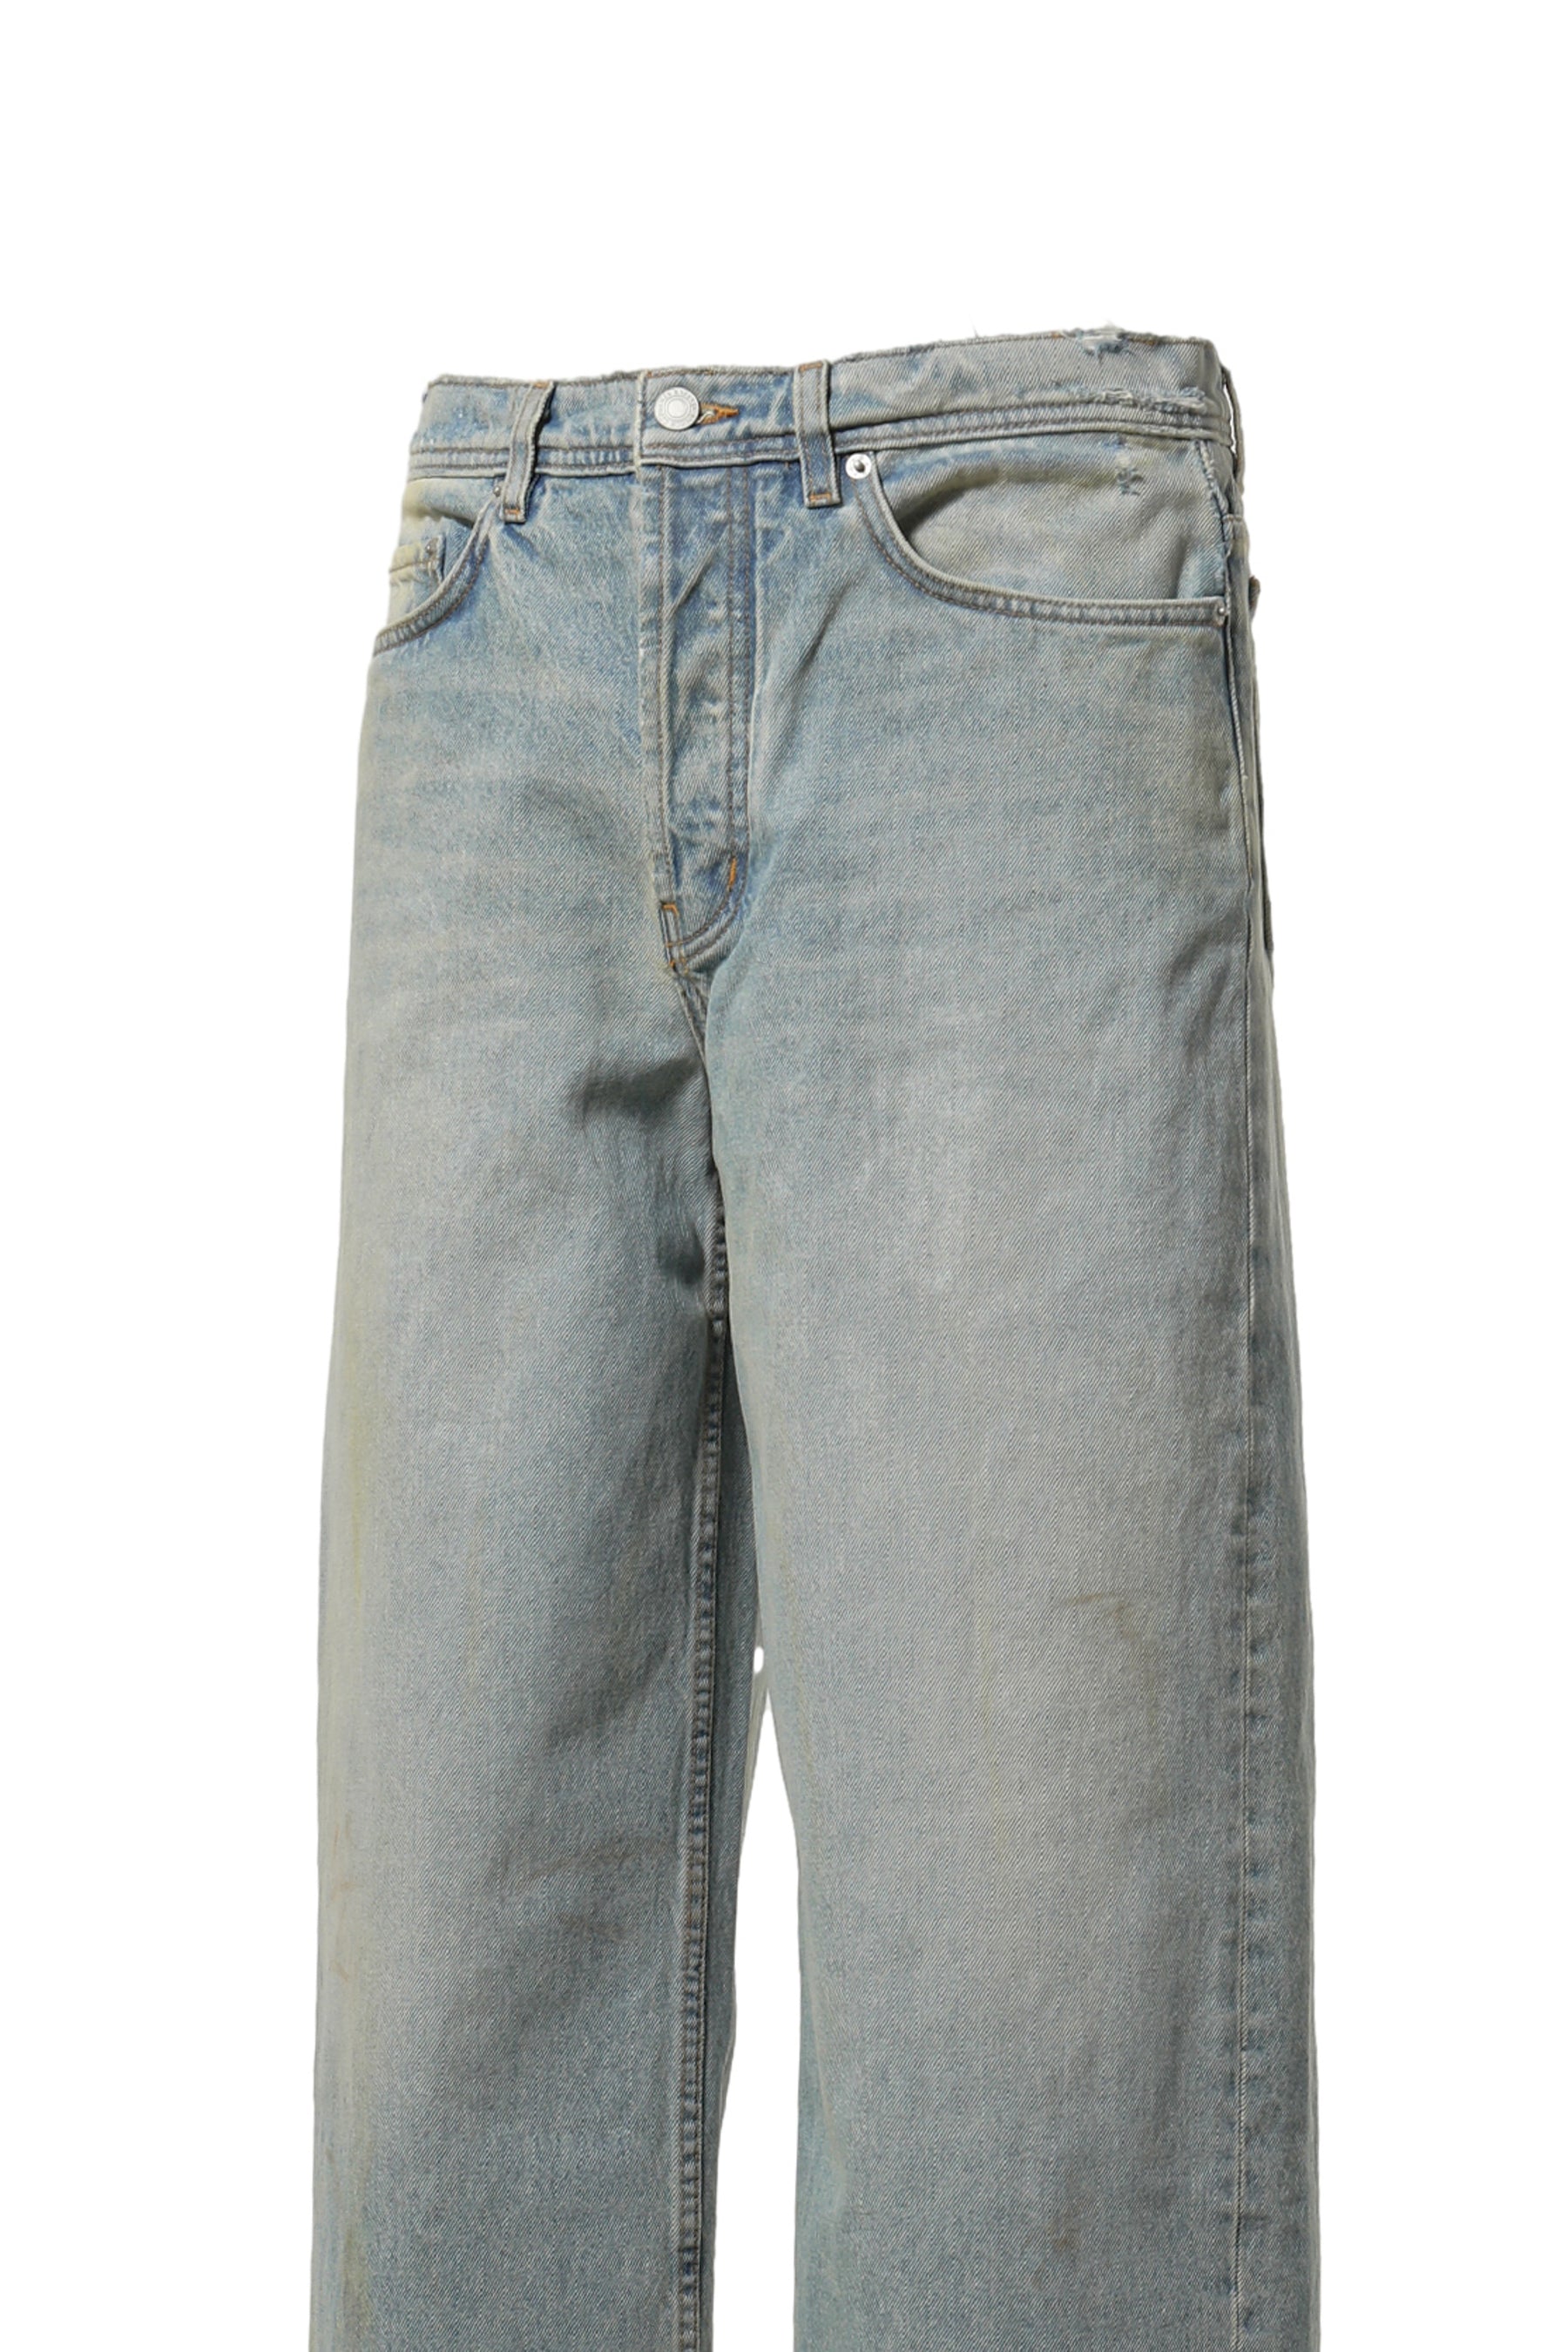 CORPSE POSE JEANS / WASHED BLU